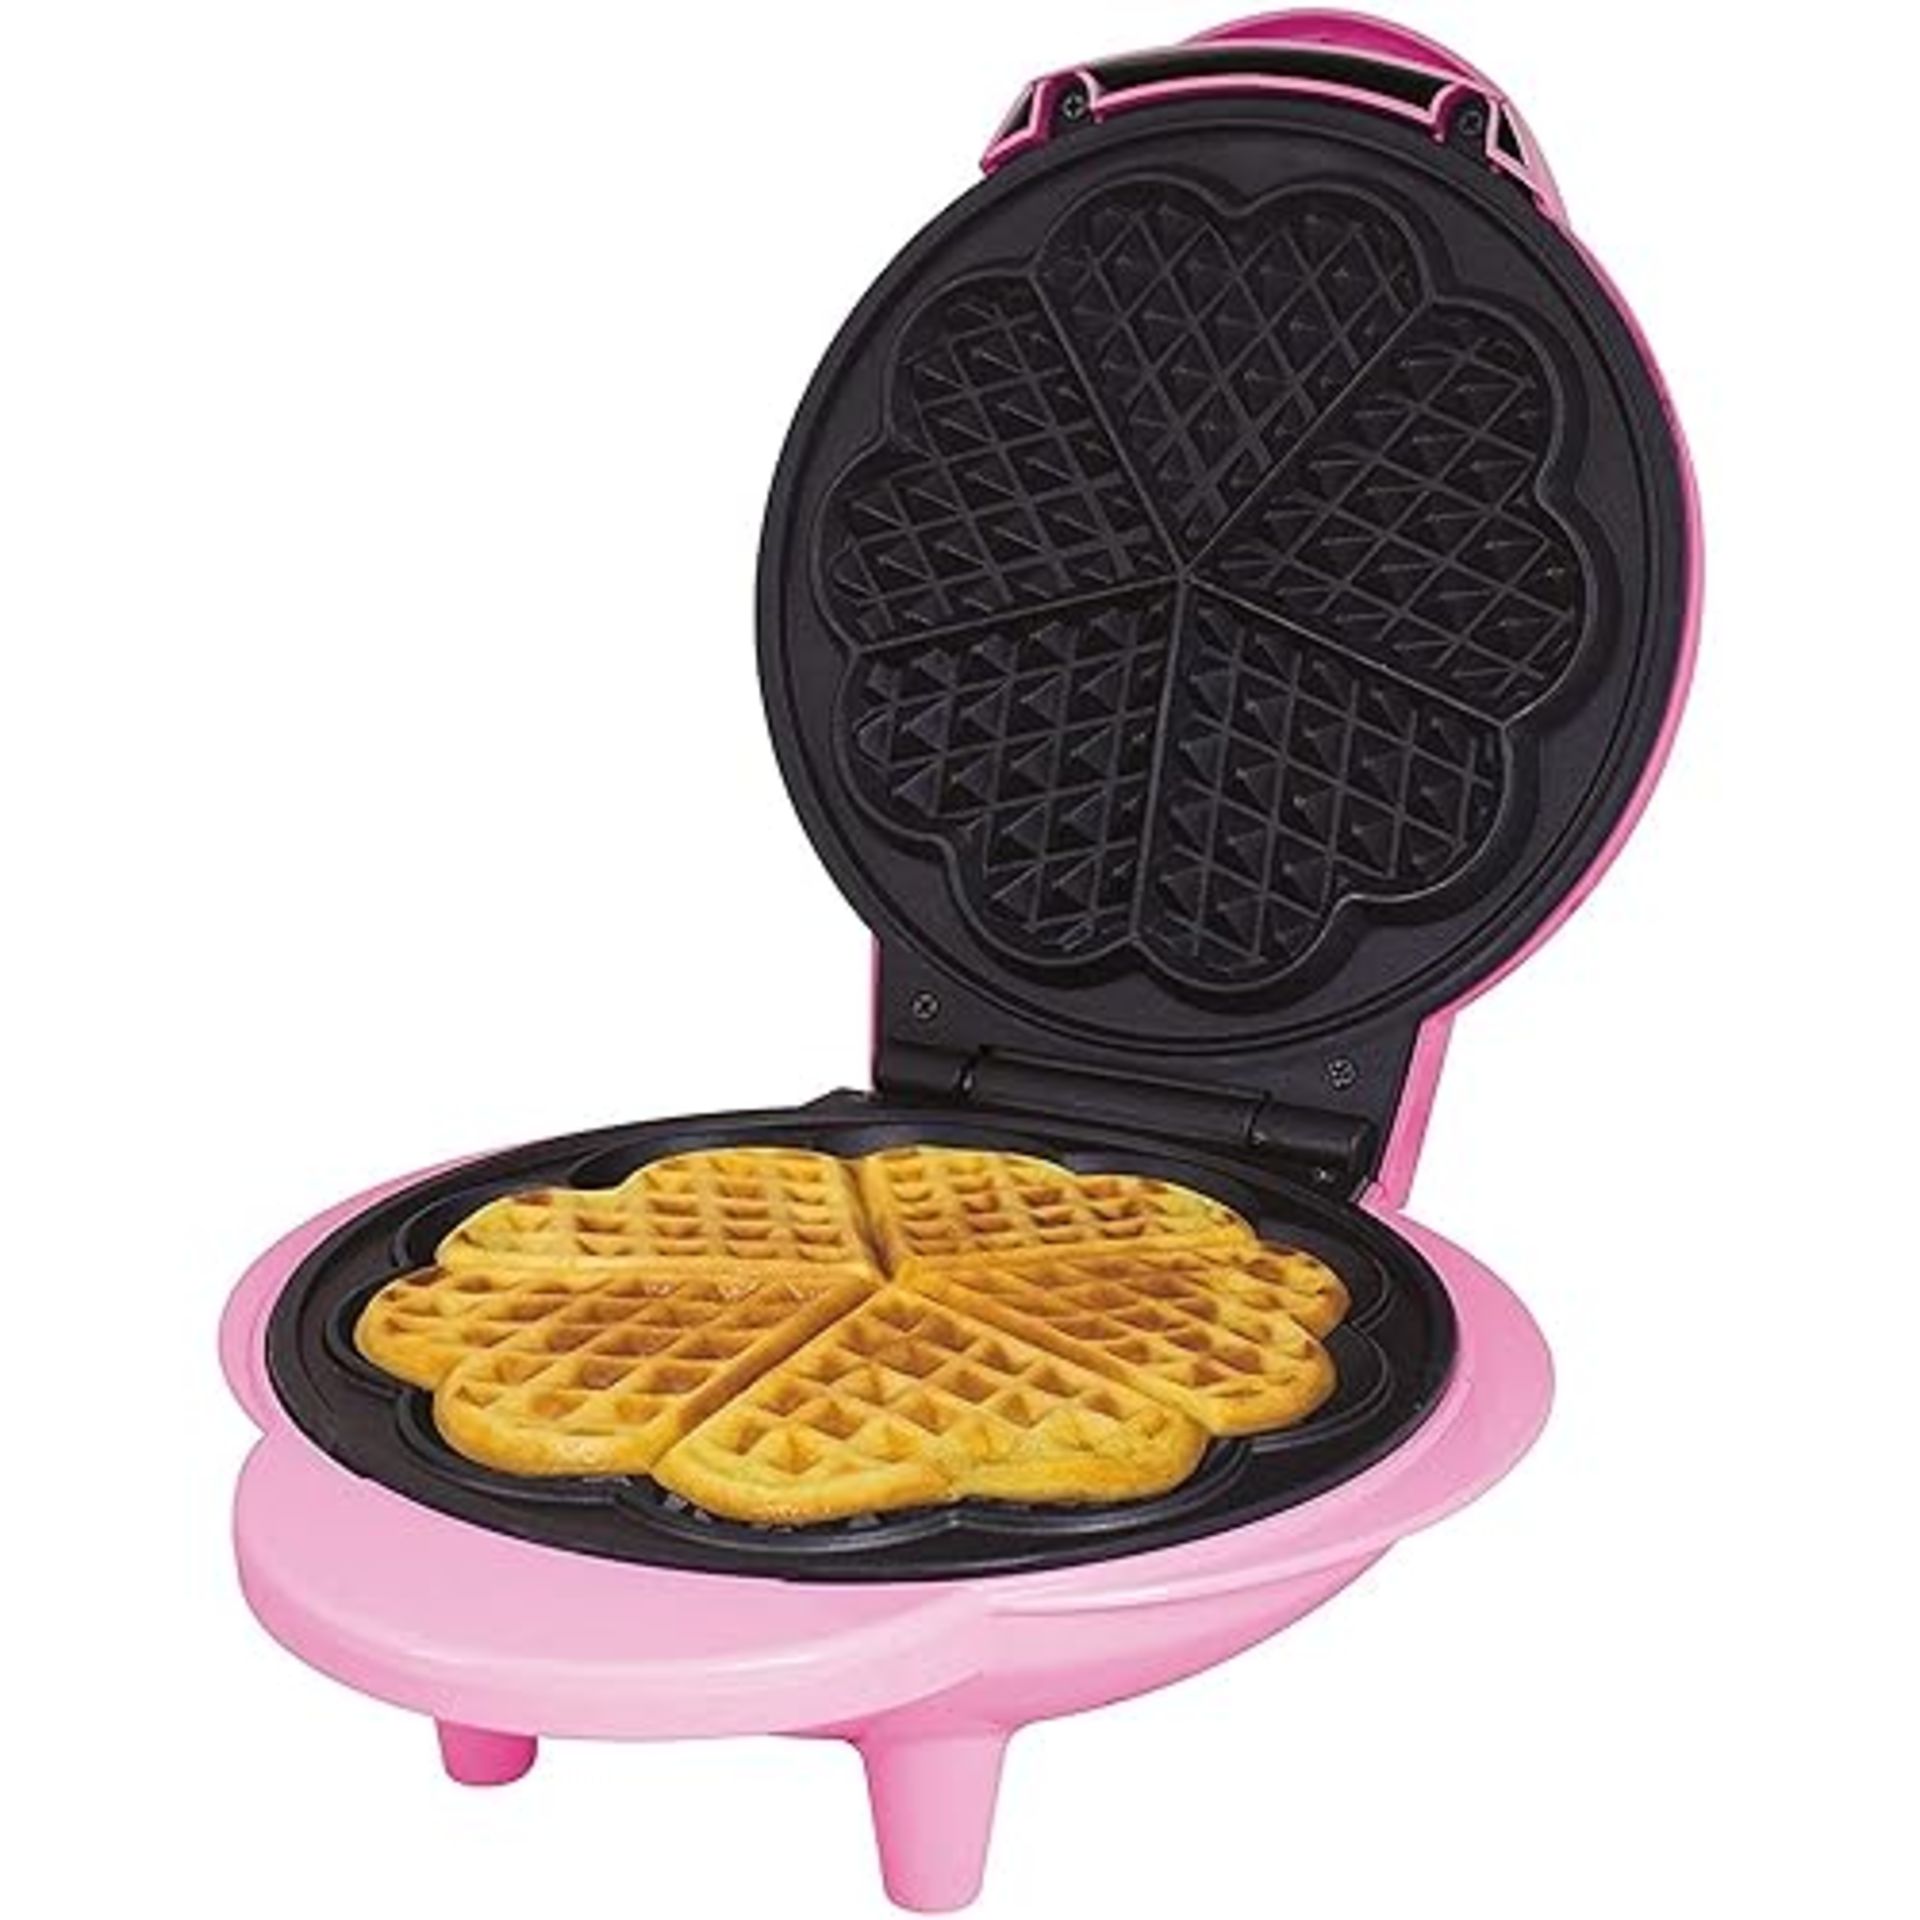 Global Gizmos 35570 Heart Shaped Waffle Maker / 1000W / Unique Thermostatic Design/Non-Stick Plat...